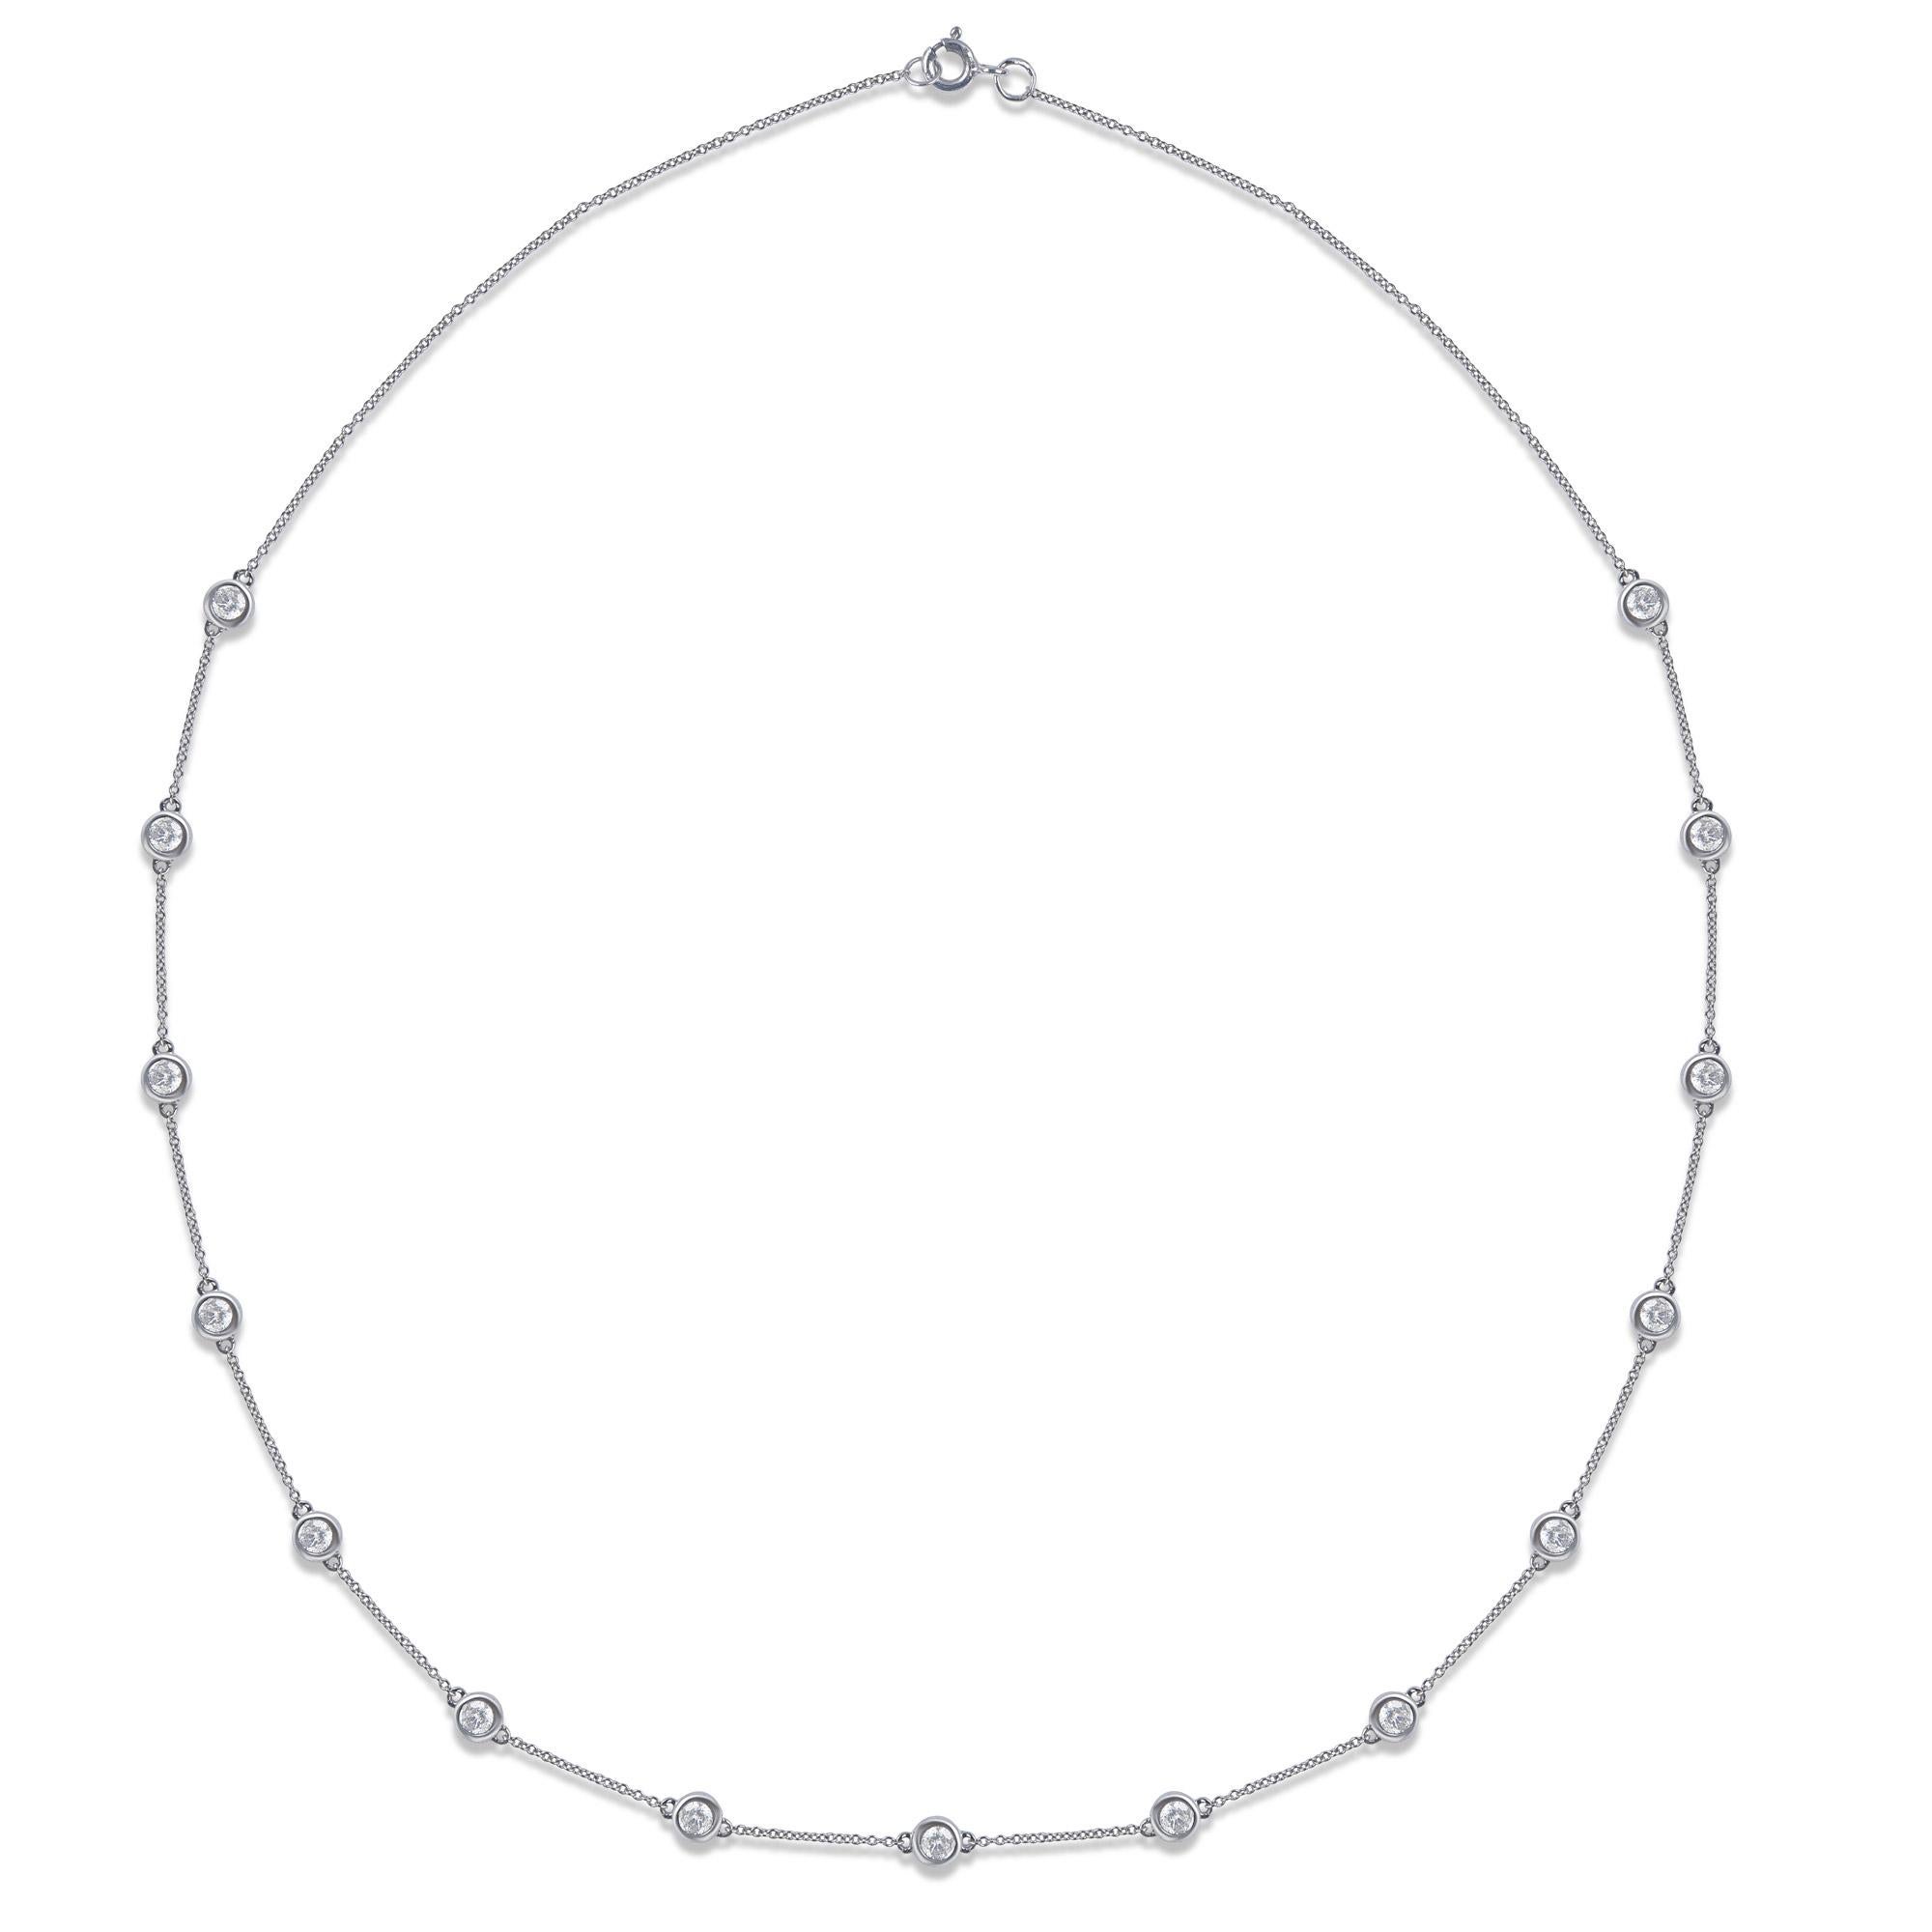 This elegant station necklace is hand-crafted by our in-house experts in 14-karat white gold and studded with 14 brilliant cut diamonds in bezel setting. The diamonds are graded HI colour, I2 Clarity. The length of the cable chain necklace is 18